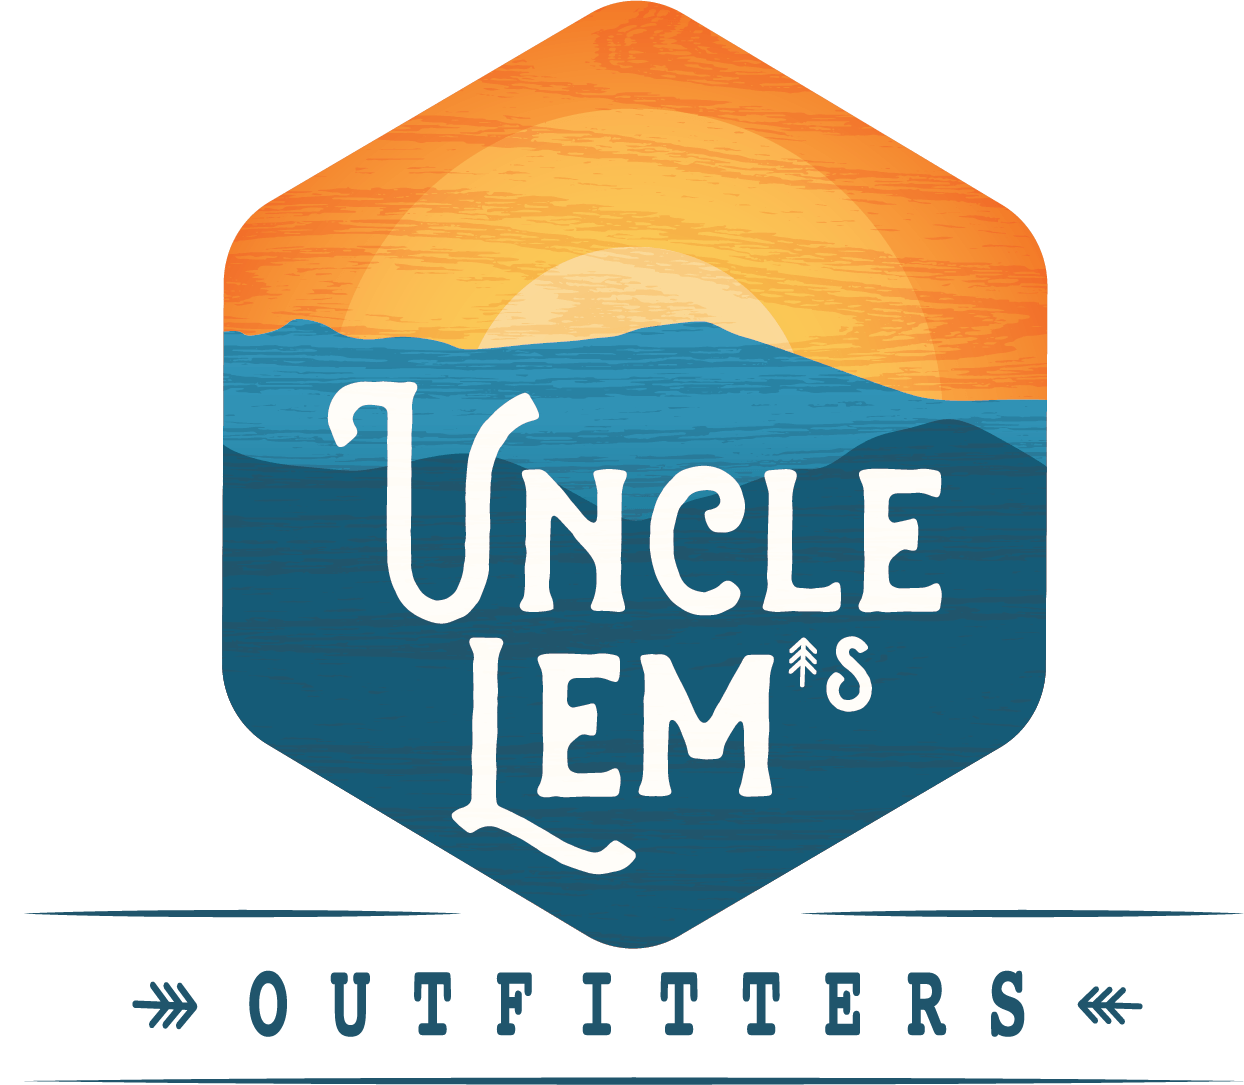 Outdoor Gear Logo - Outdoor Gear, Footwear and Apparel - Uncle Lem's Outfitters